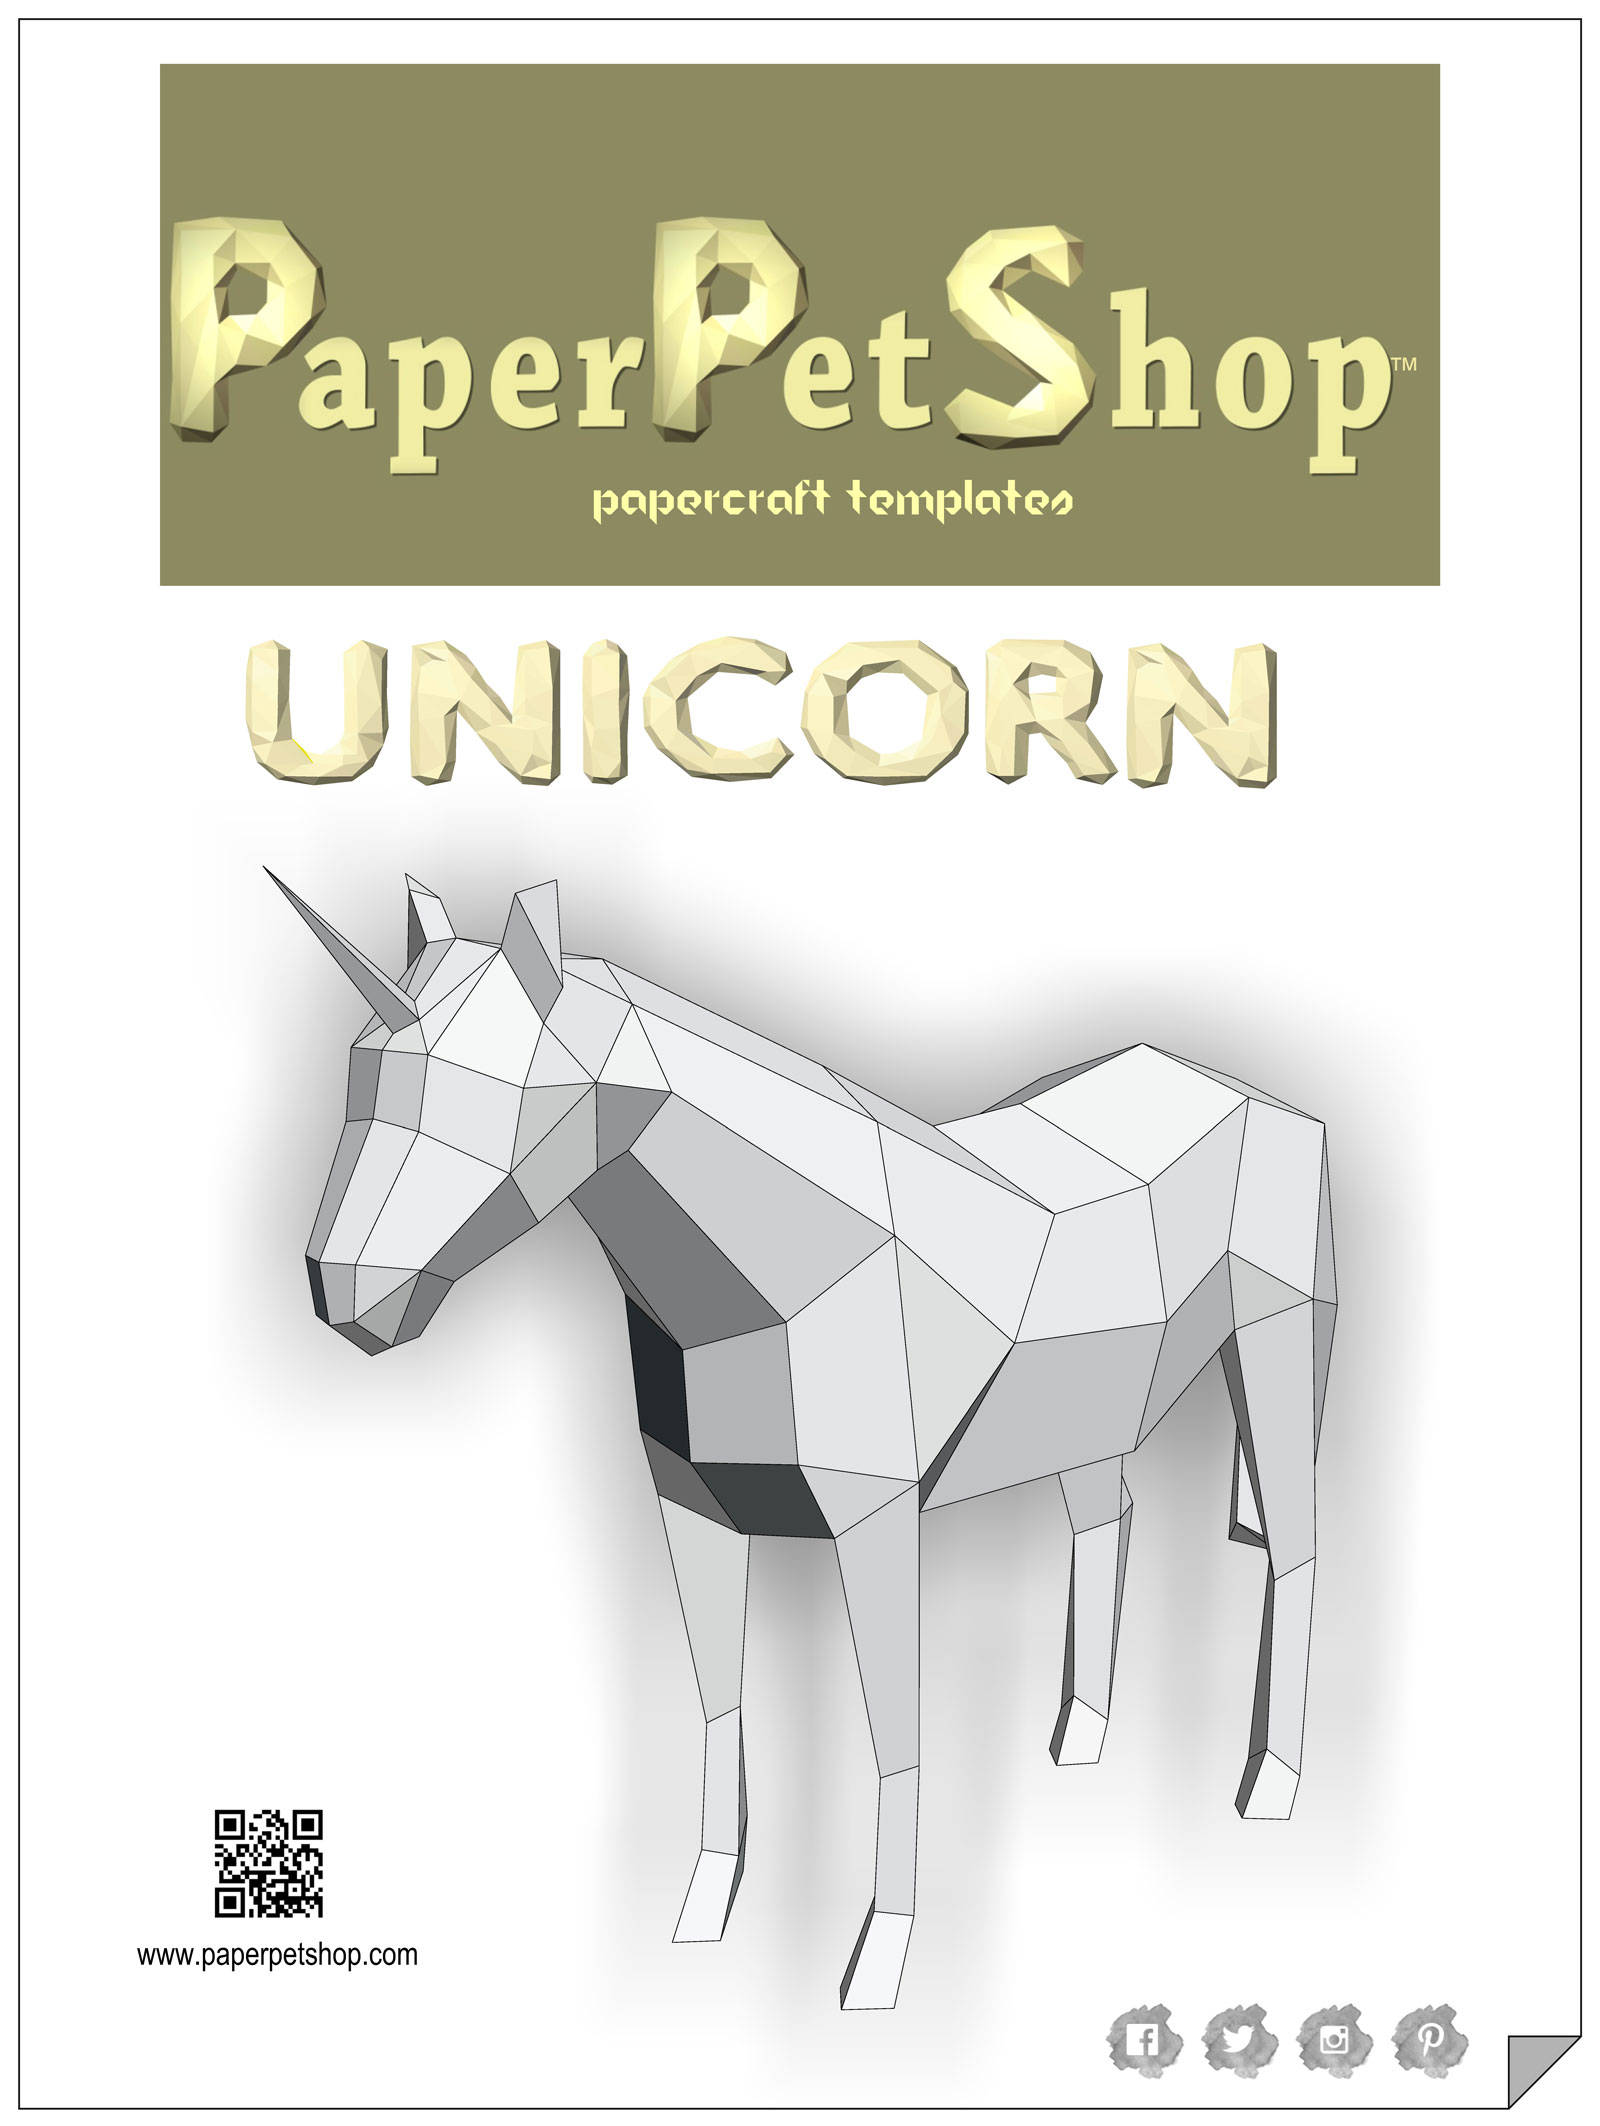 Free Printable Build a Unicorn Craft - Pjs and Paint